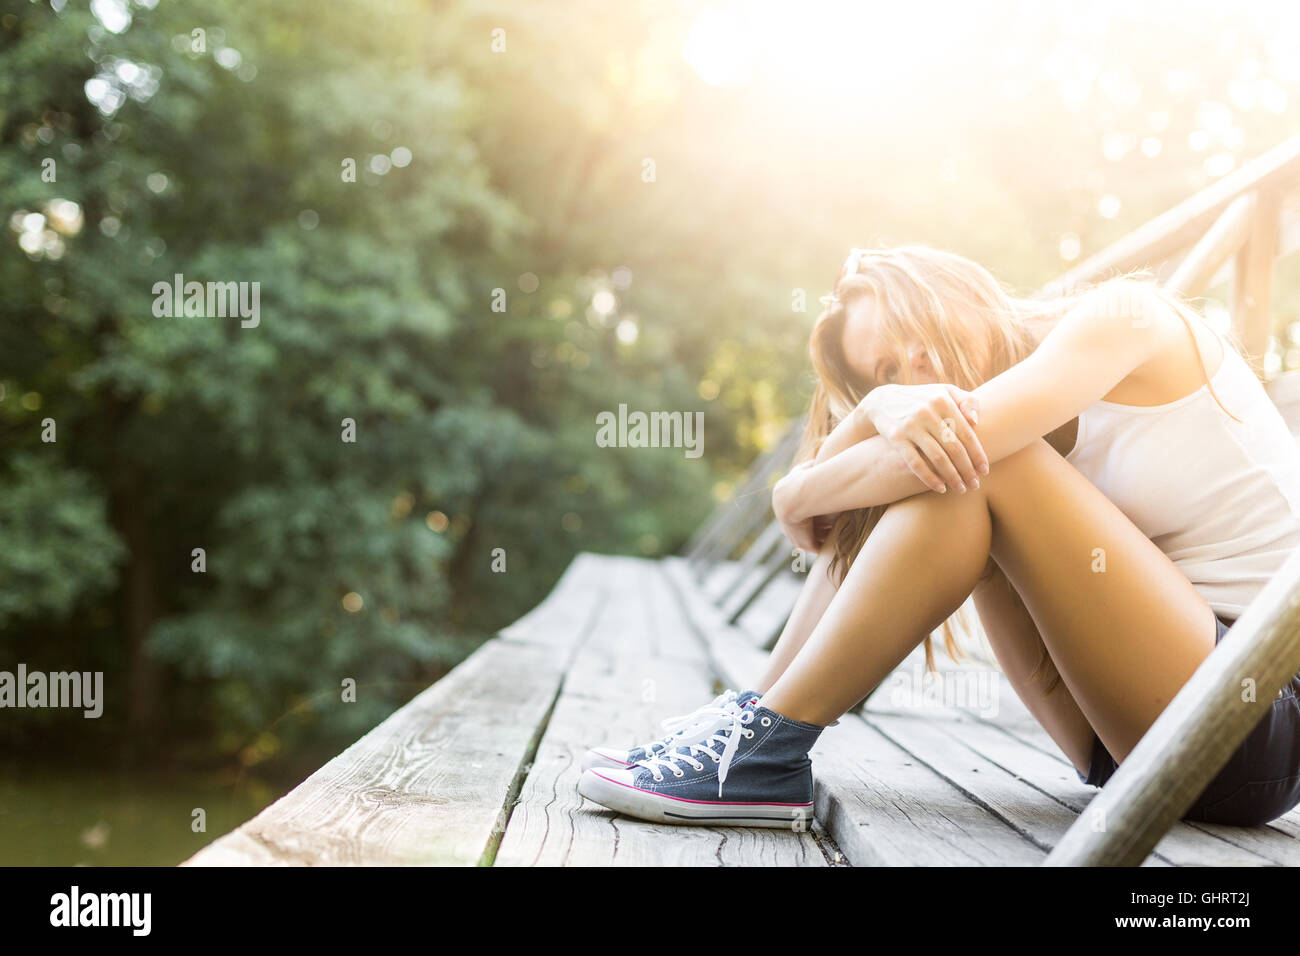 Young woman with beautiful sporty legs sitting on a wooden bridge railing in jeans sneakers Stock Photo